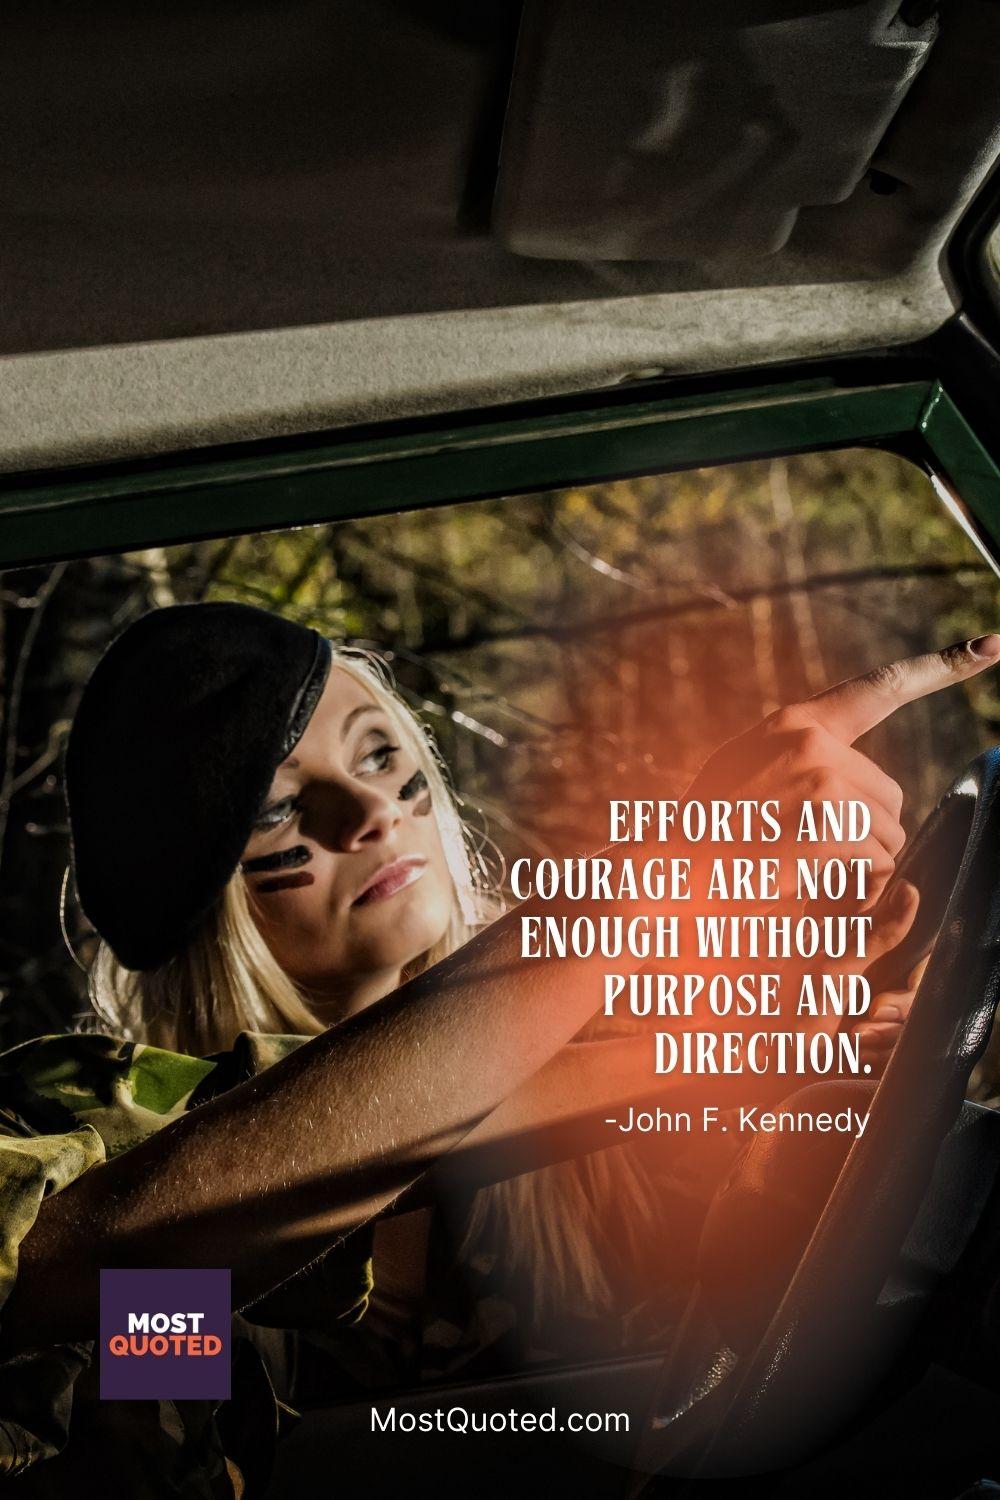 Efforts and courage are not enough without purpose and direction. - John F. Kennedy